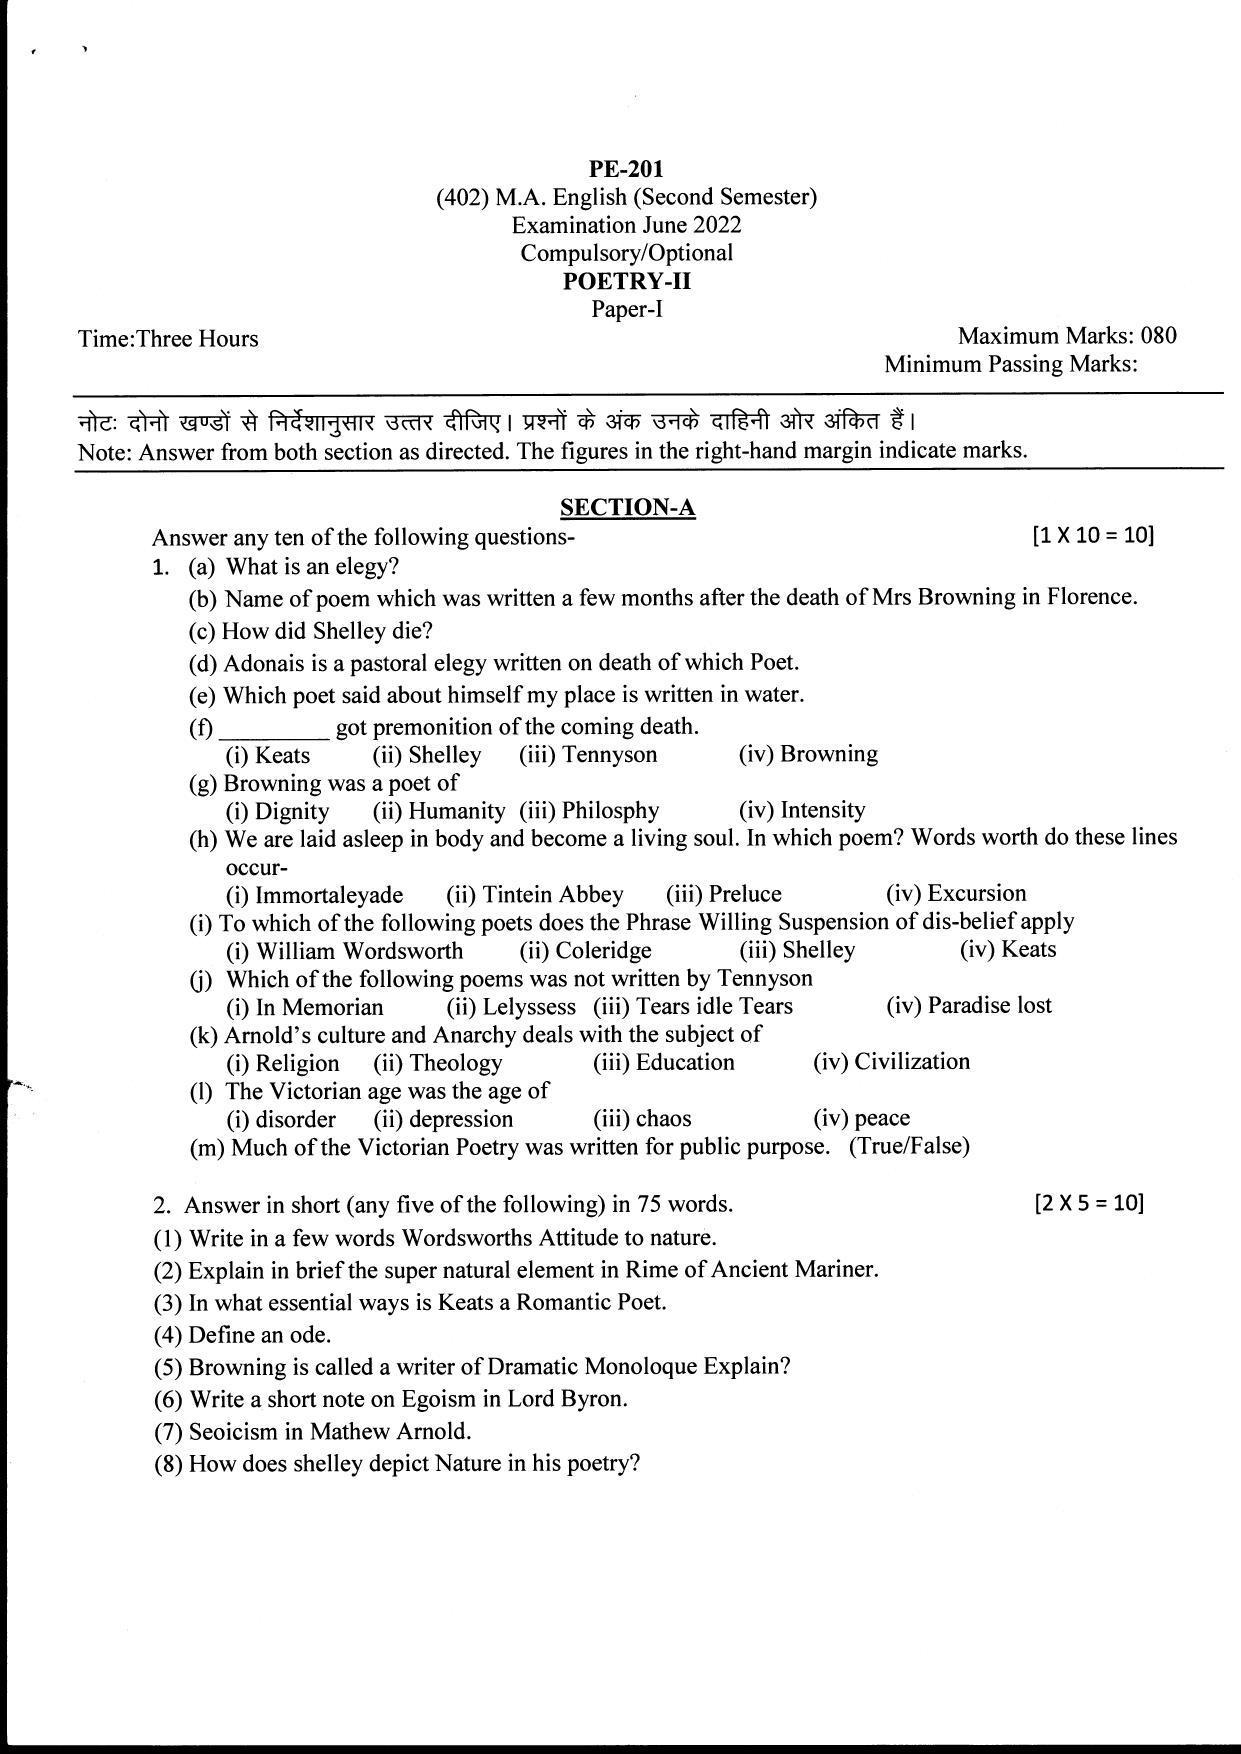 Bilaspur University Question Paper June 2022:M.A. English (Second Semester) Poetry Paper 1 - Page 1